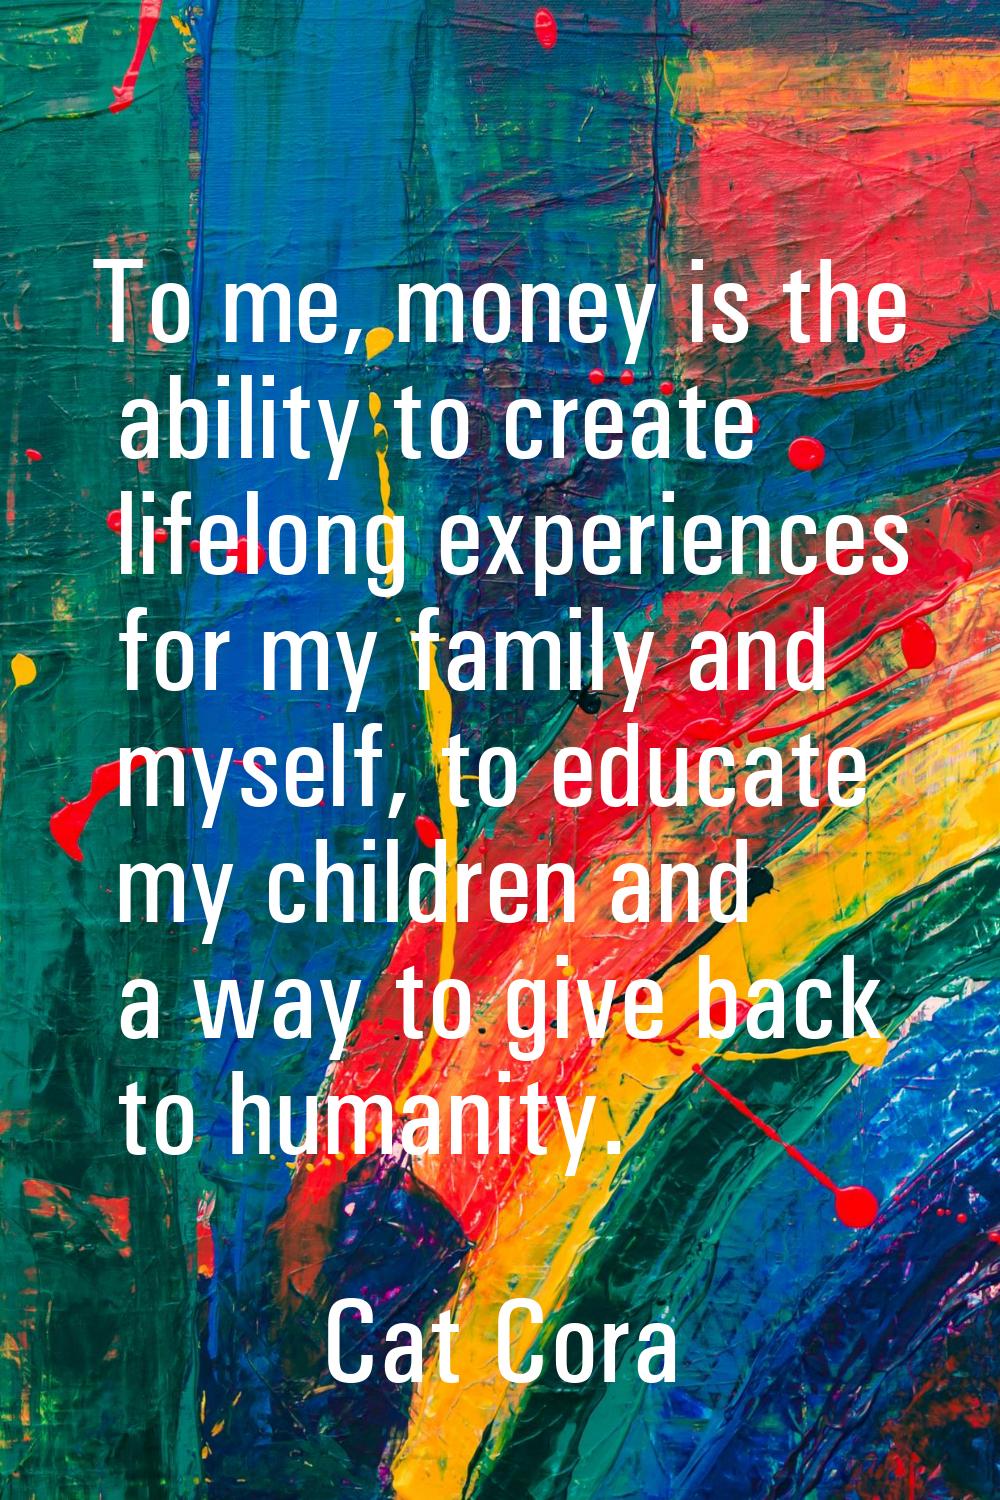 To me, money is the ability to create lifelong experiences for my family and myself, to educate my 